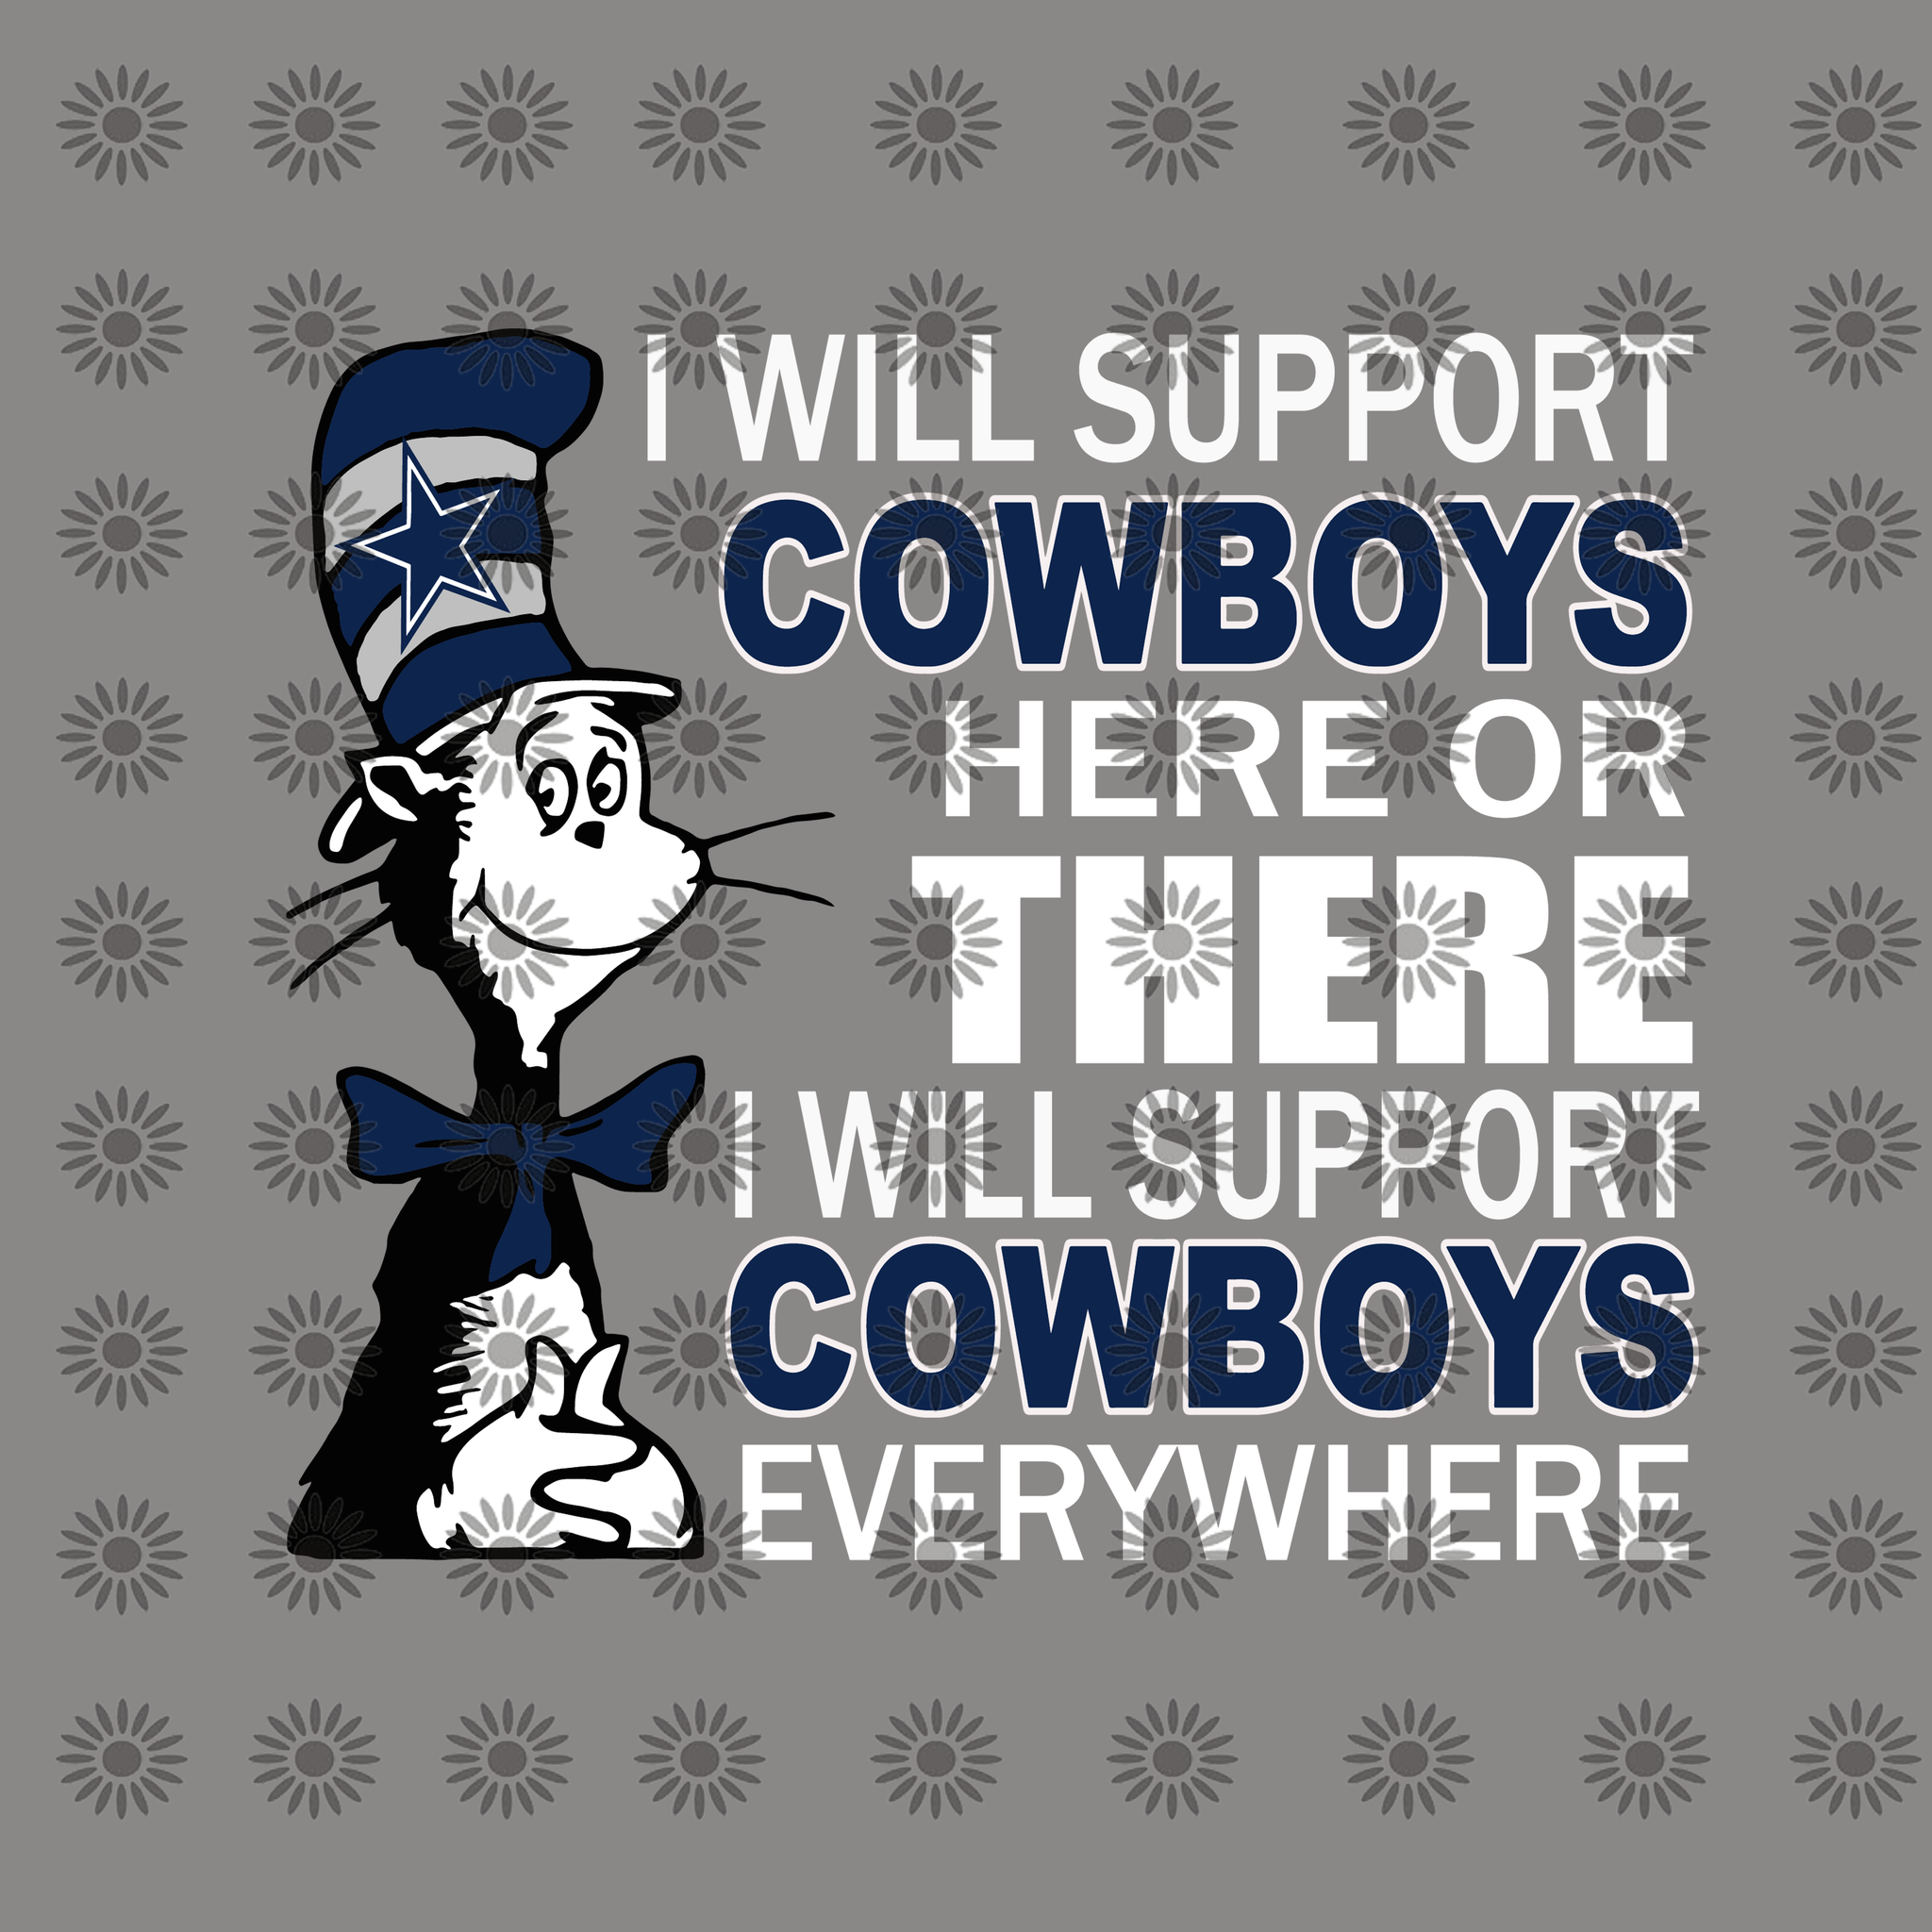 I will support cowboys  here or there, I will support cowboys everywhere,  Dallas Cowboys svg, Cowboys svg, Football svg, Dallas Cowboys logo, Dallas Cowboys, skull Dallas Cowboys file,Svg, png, dxf,eps file for Cricut, Silhouette